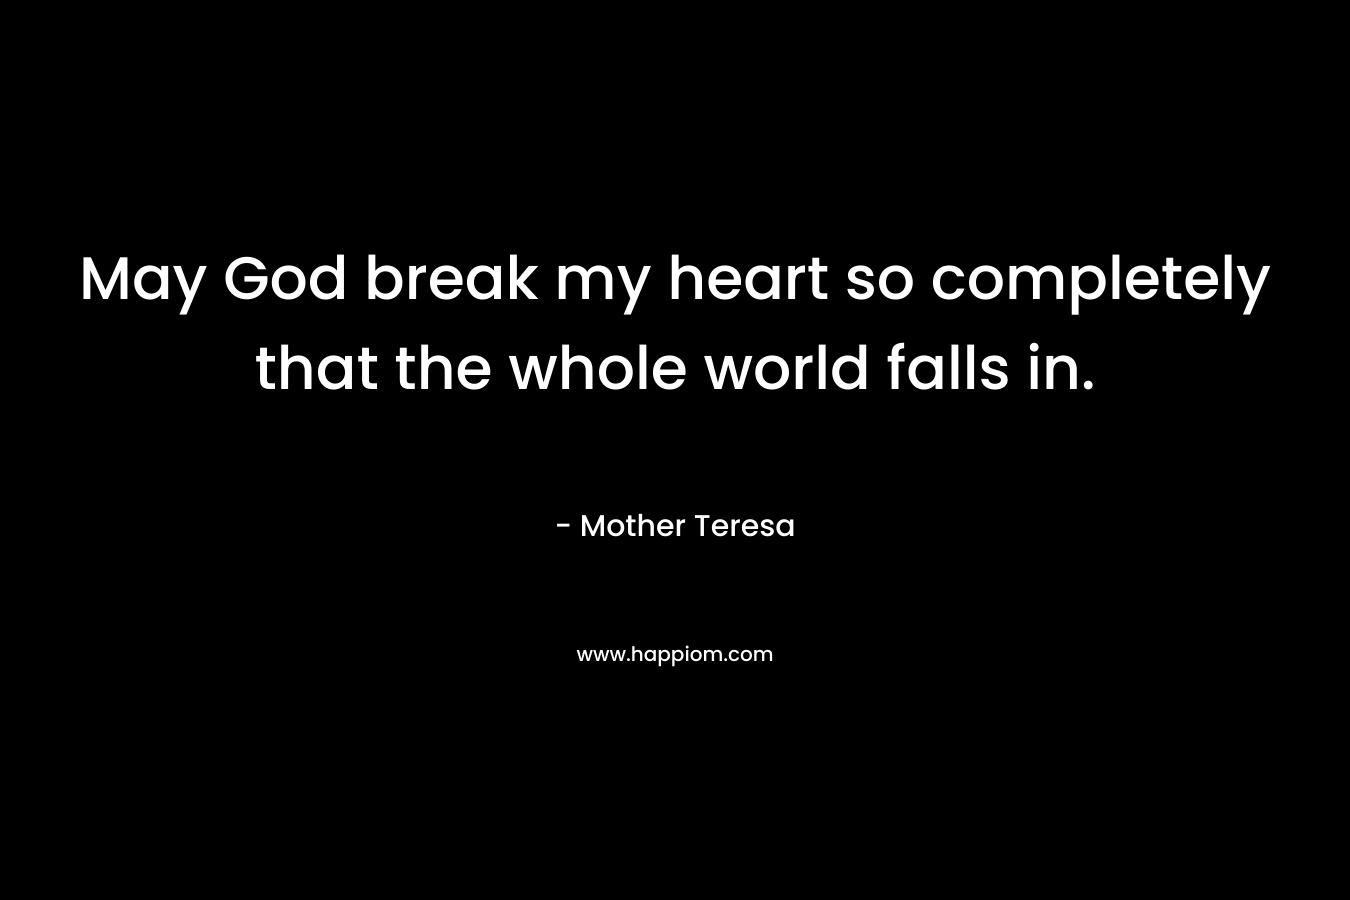 May God break my heart so completely that the whole world falls in. – Mother Teresa